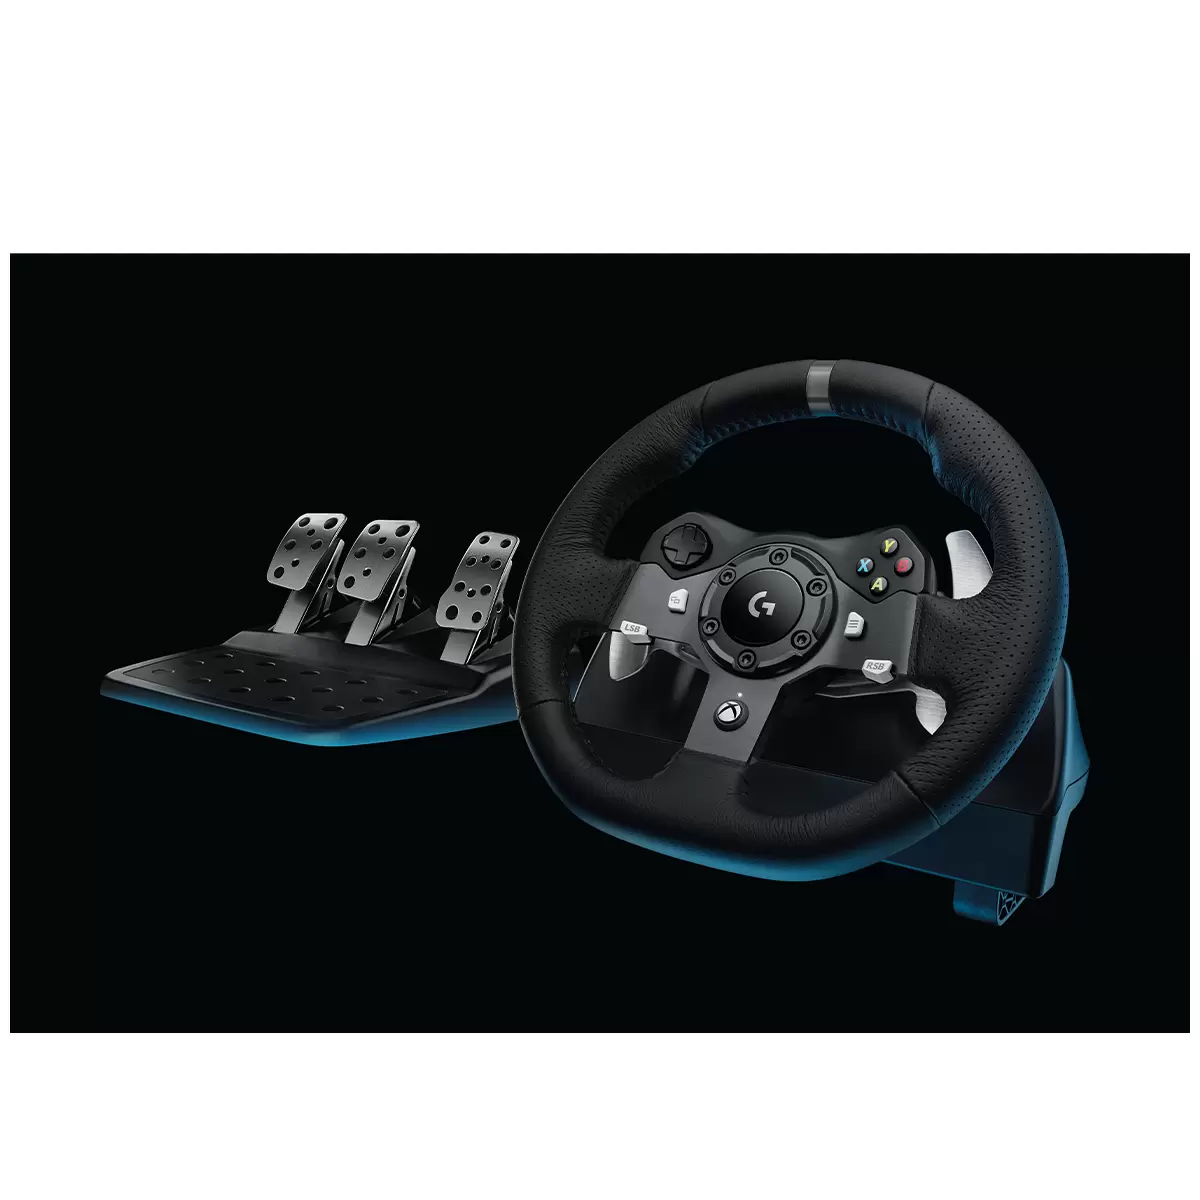 Logitech G920 Driving Force Racing Wheel Bundle for XBOX and PC